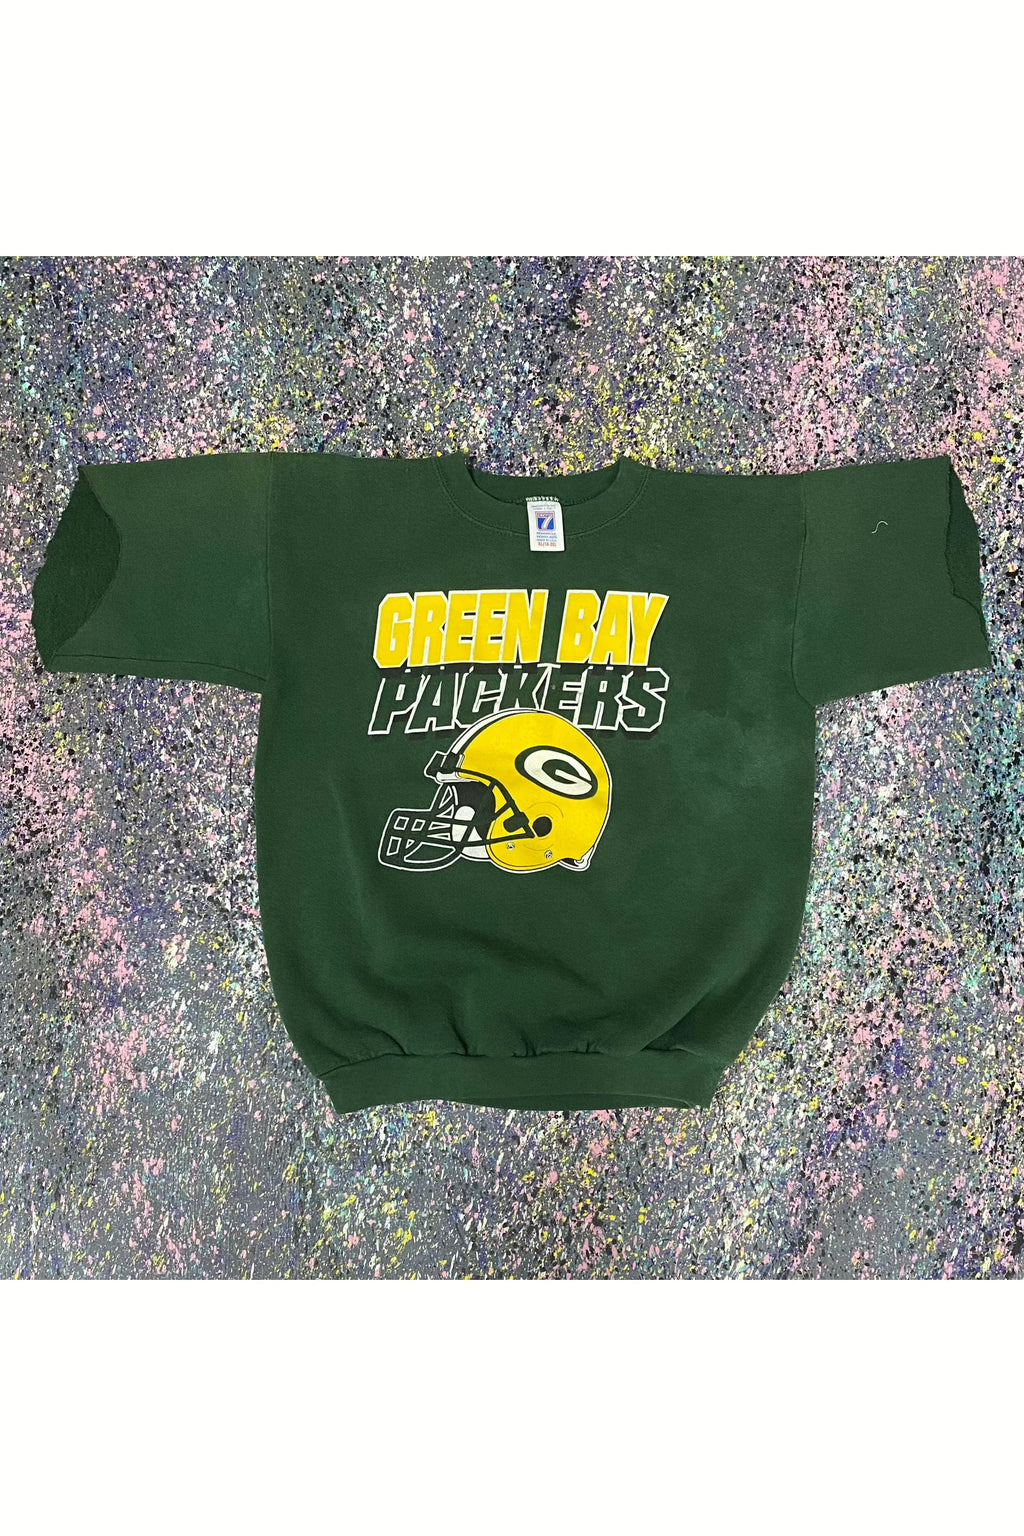 Vintage Logo 7 Green Bay Packers Youth Modified Crewneck- YTH XL (18-20)